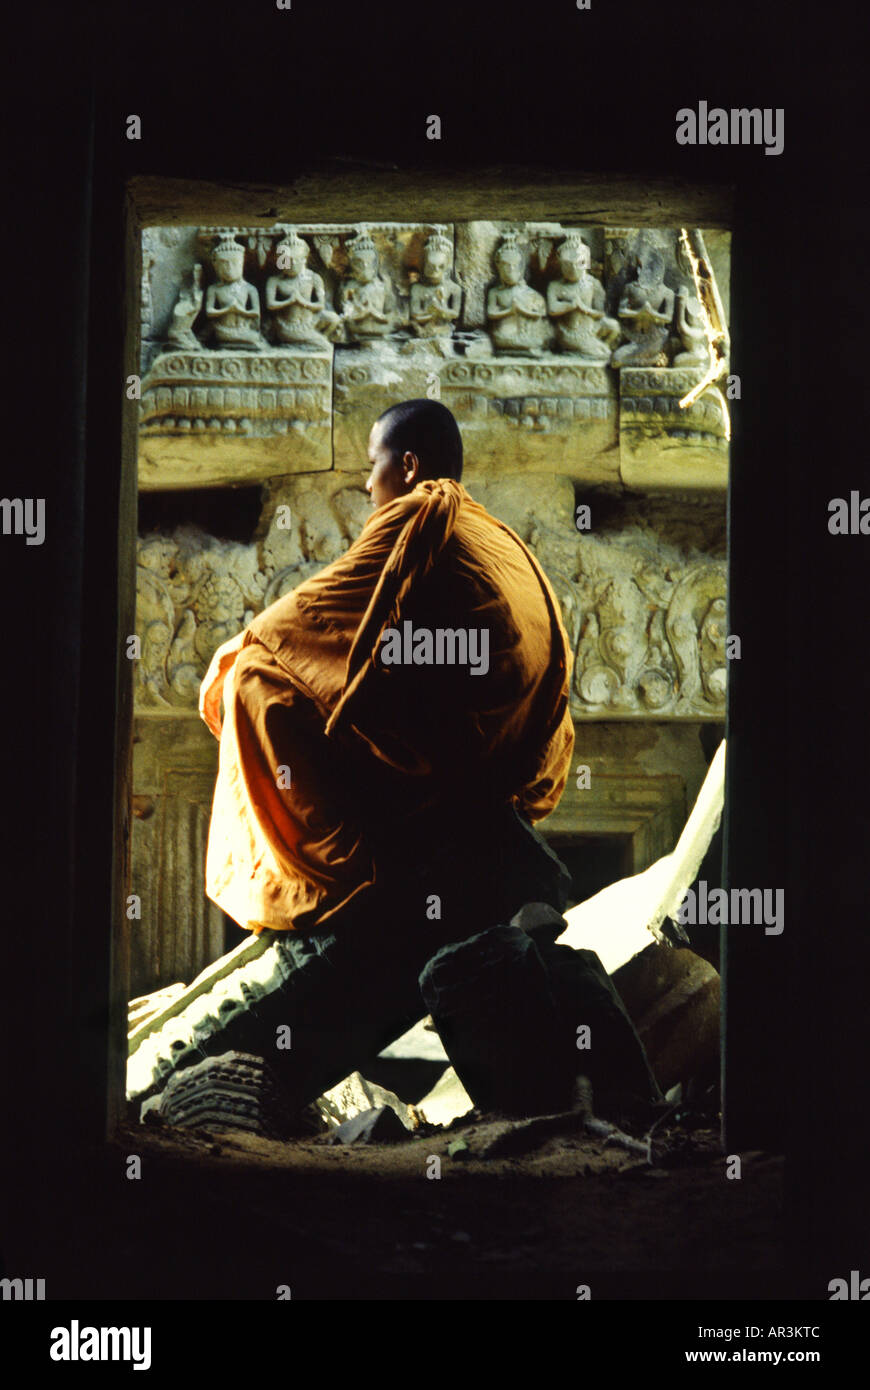 Monk in Ta Prom temple, Angkor, Siem Raep Cambodia, Asia Stock Photo